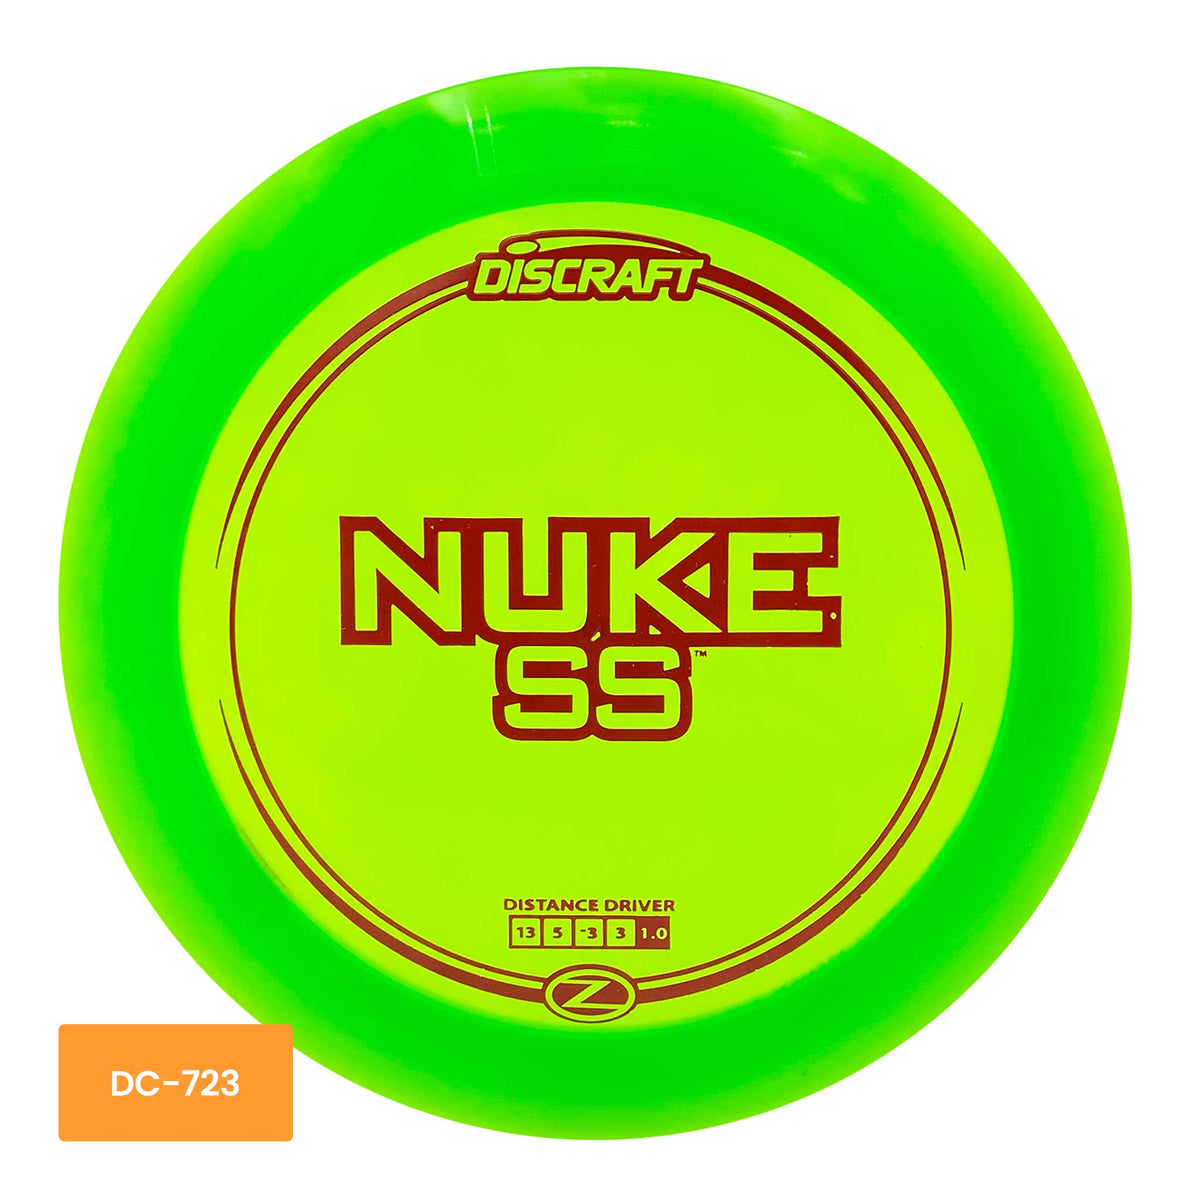 Discraft Z Line Nuke SS distance driver - Green/Red